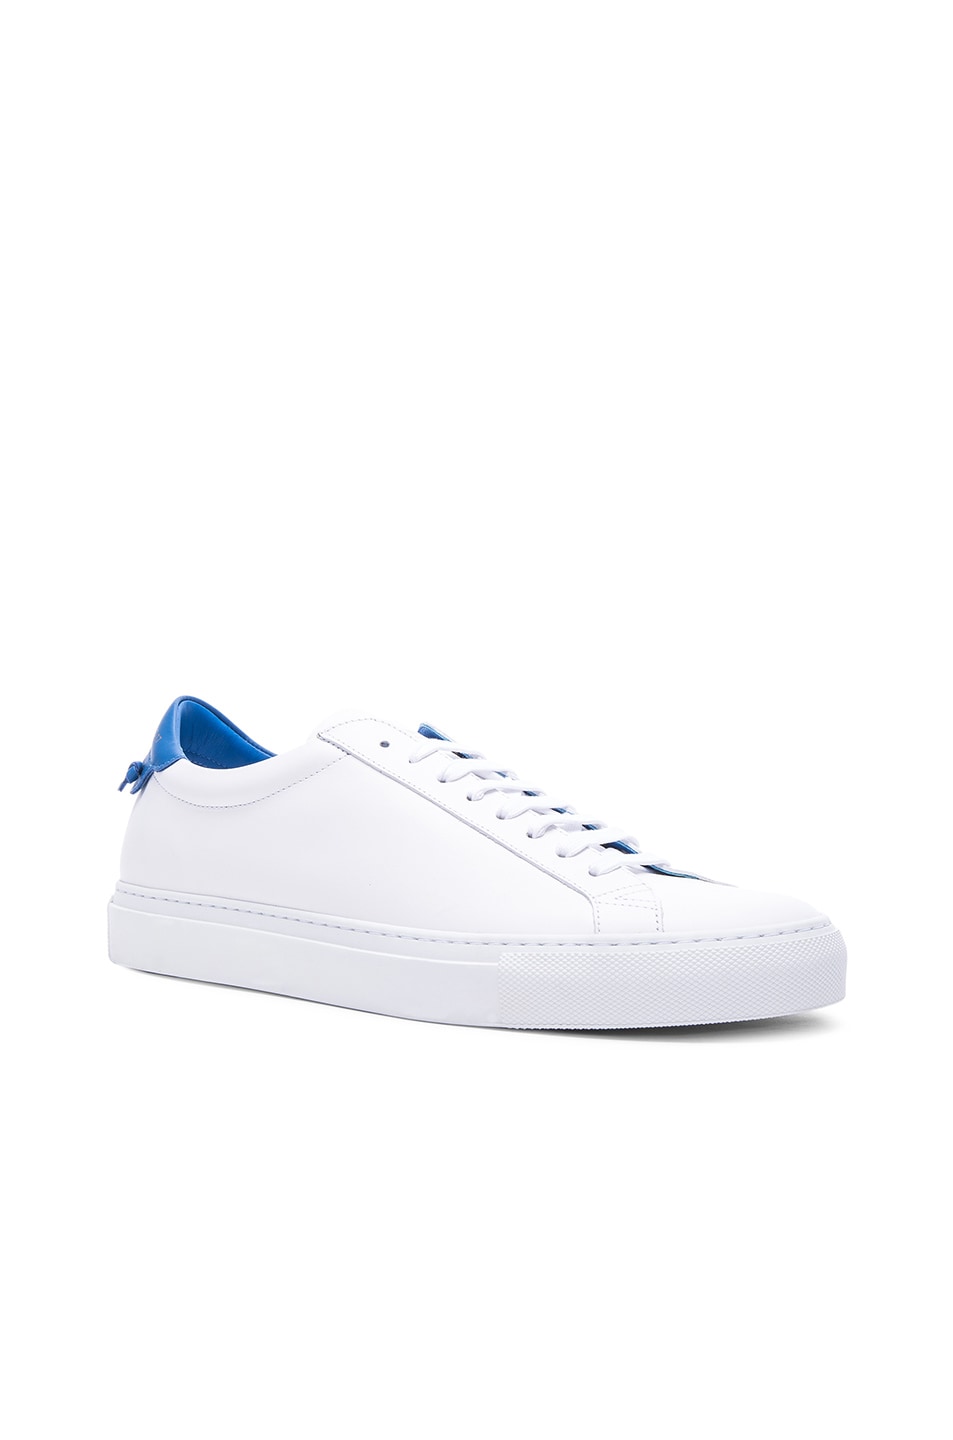 Image 1 of Givenchy Knots Leather Low Sneakers in White & Blue